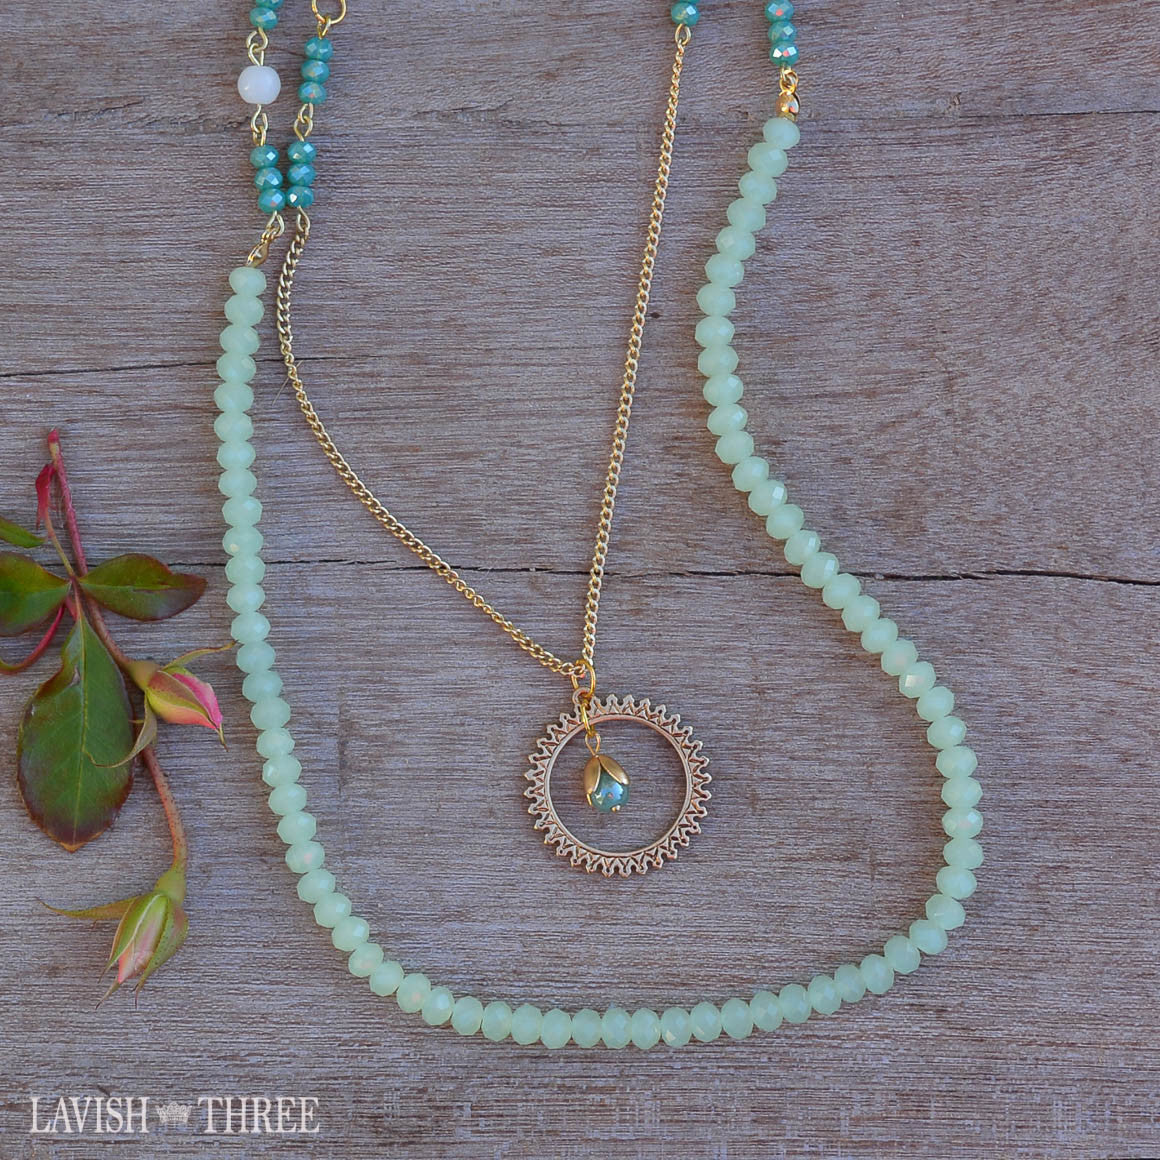 Harvest gold chain necklace, blue and green beads